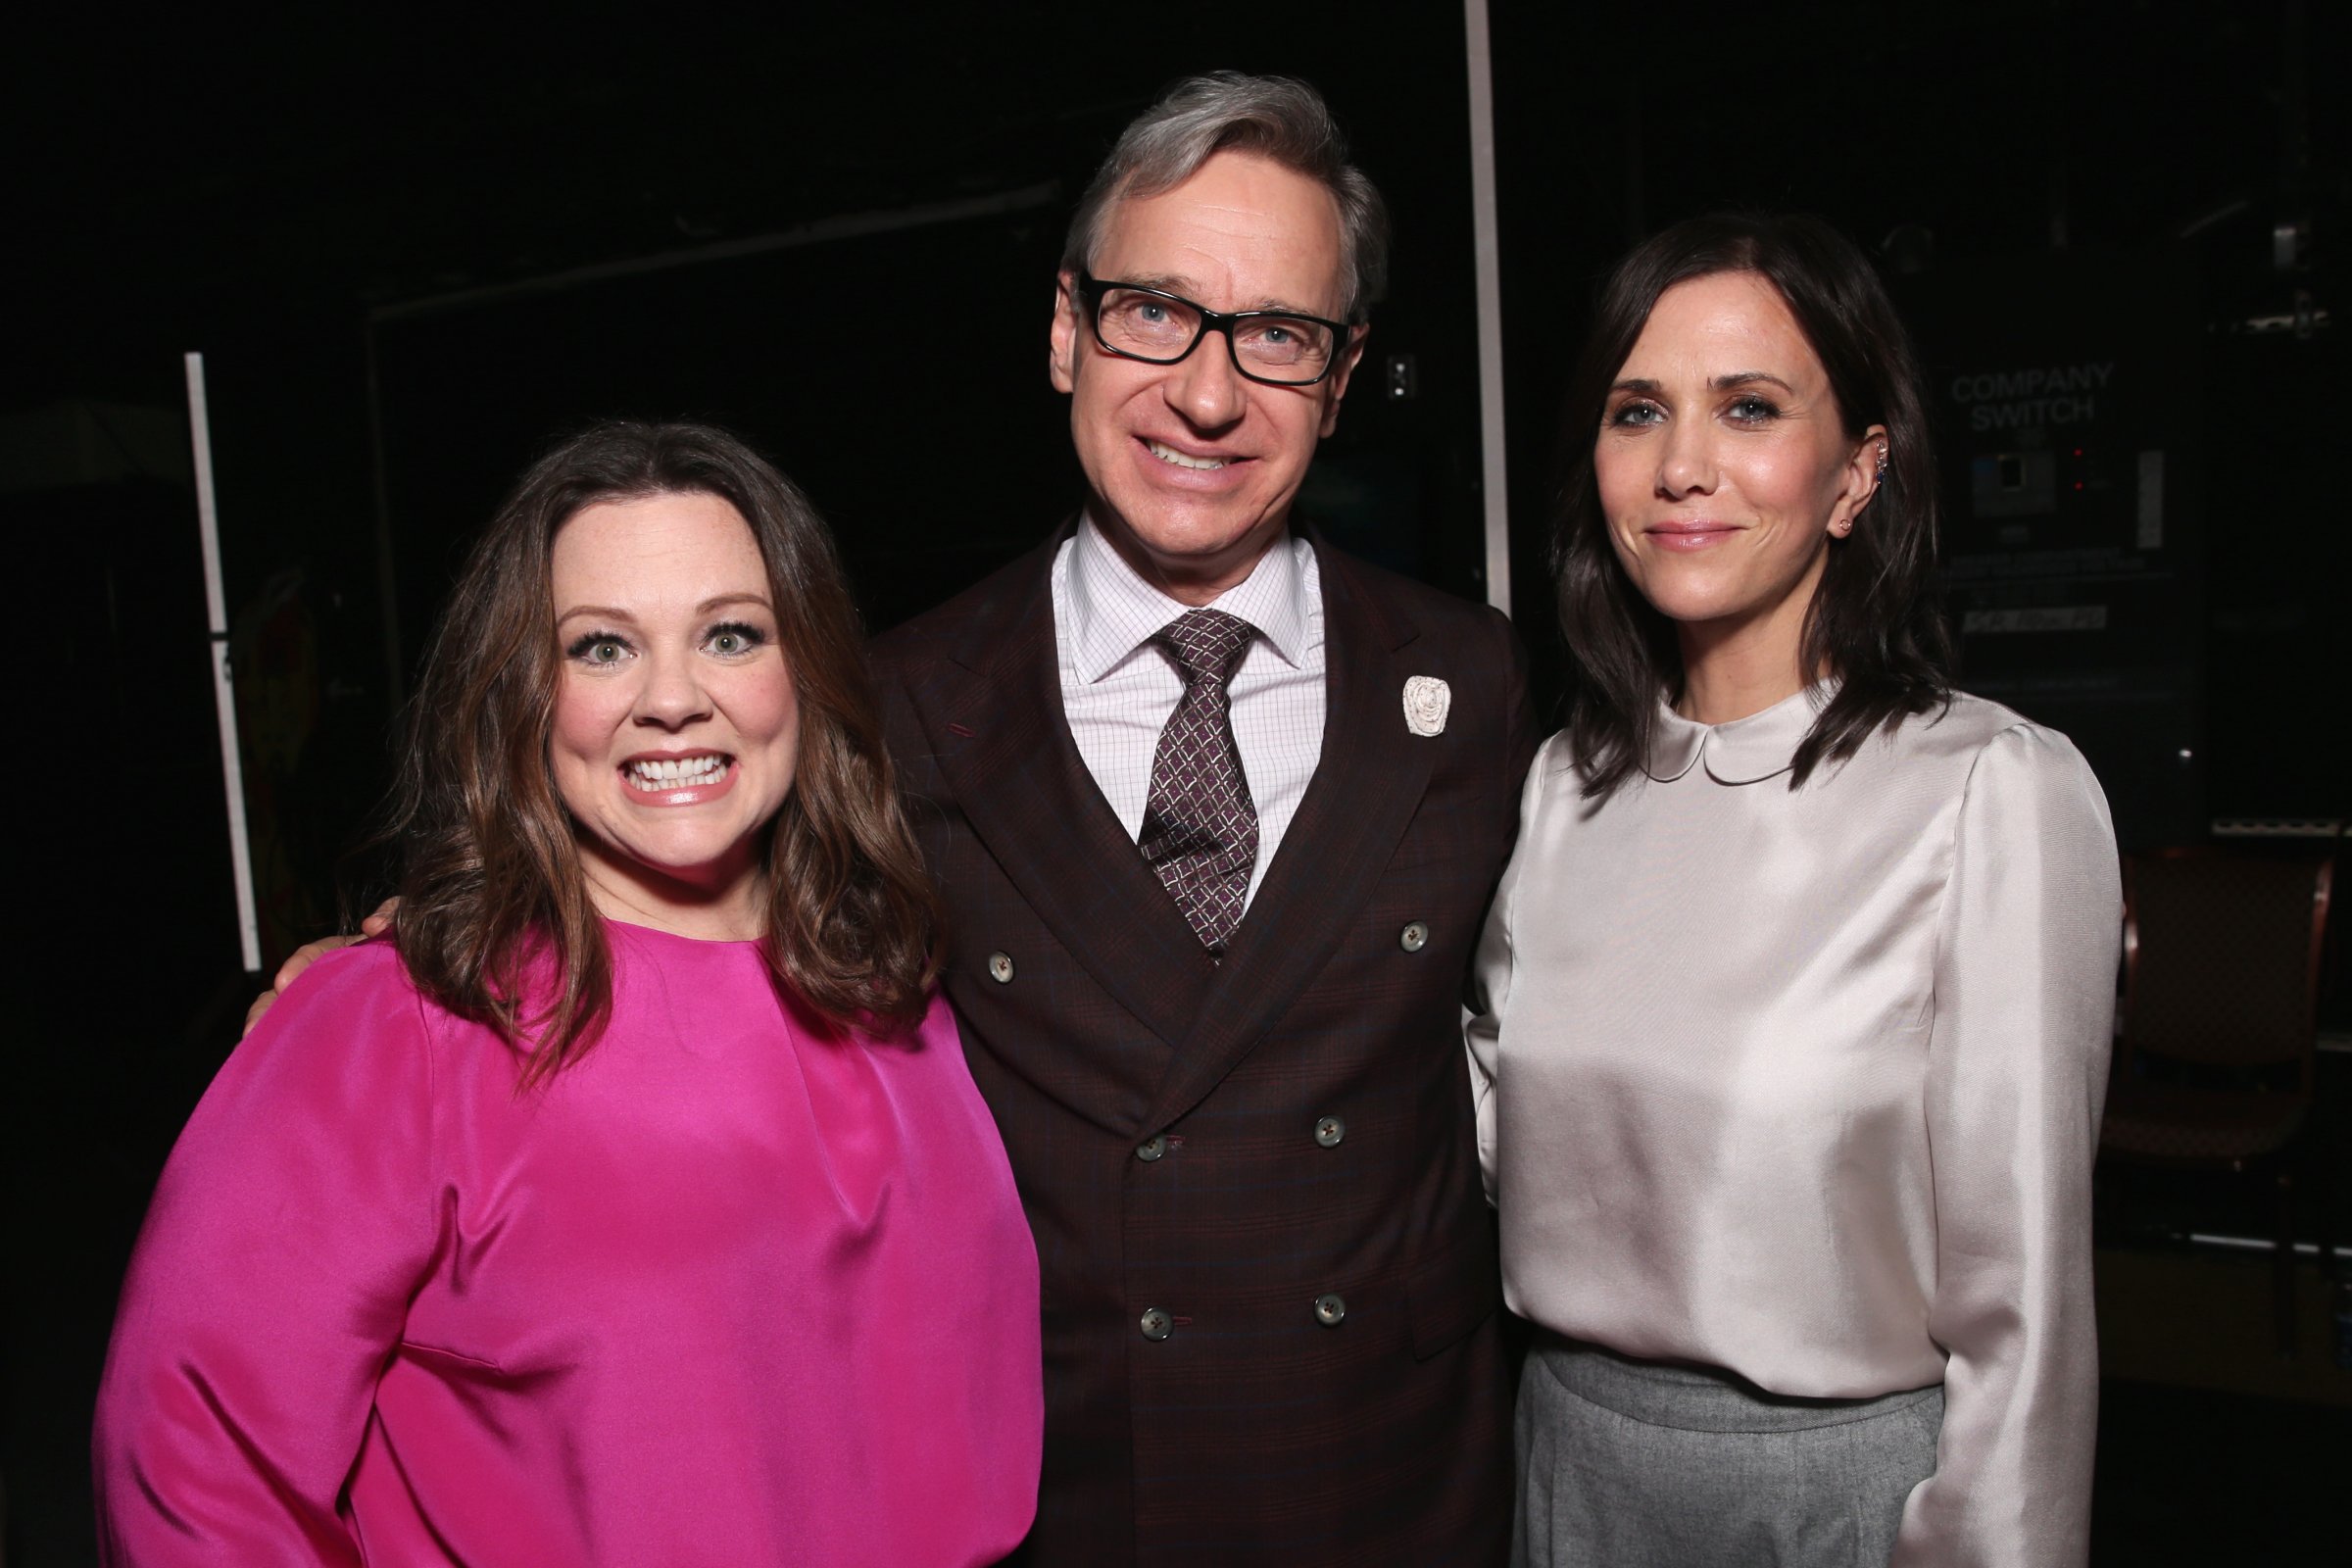 Actress Melissa McCarthy, director Paul Feig and actress Kristen Wiig attend CinemaCon 2016 An Evening with Sony Pictures Entertainment: Celebrating the Summer of 2016 and Beyond at The Colosseum at Caesars Palace during CinemaCon, the official convention of the National Association of Theatre Owners, on April 12, 2016 in Las Vegas, Nevada.